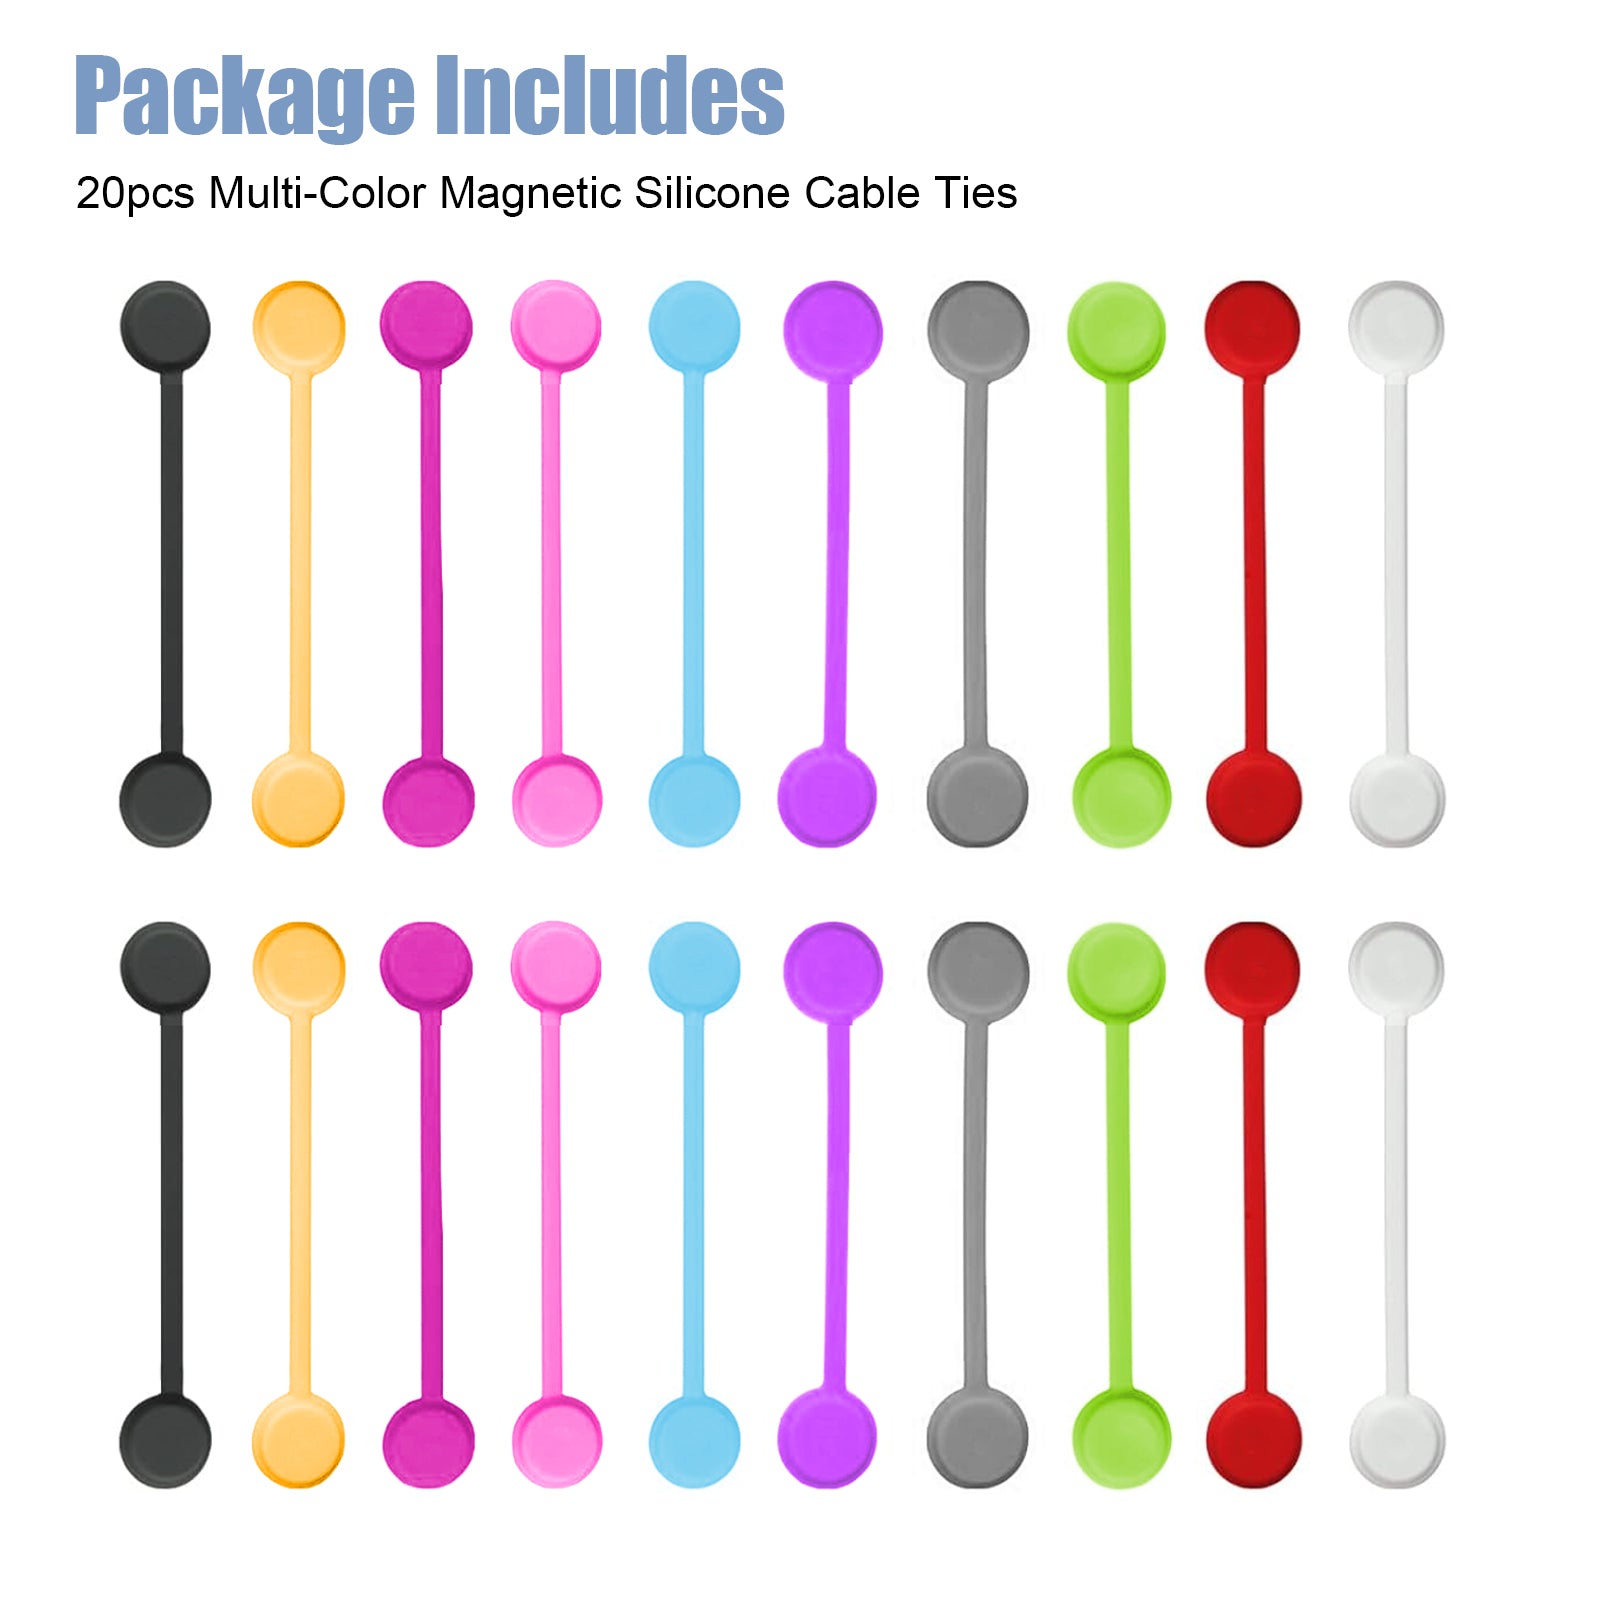 Magnetic Reusable Cable Ties - 20 Pcs Solution for Home/Office Cord Wrap, Cable Organizer - Magnetic Cord Holder with Fridge Magnet Function - Available in 10 Colors